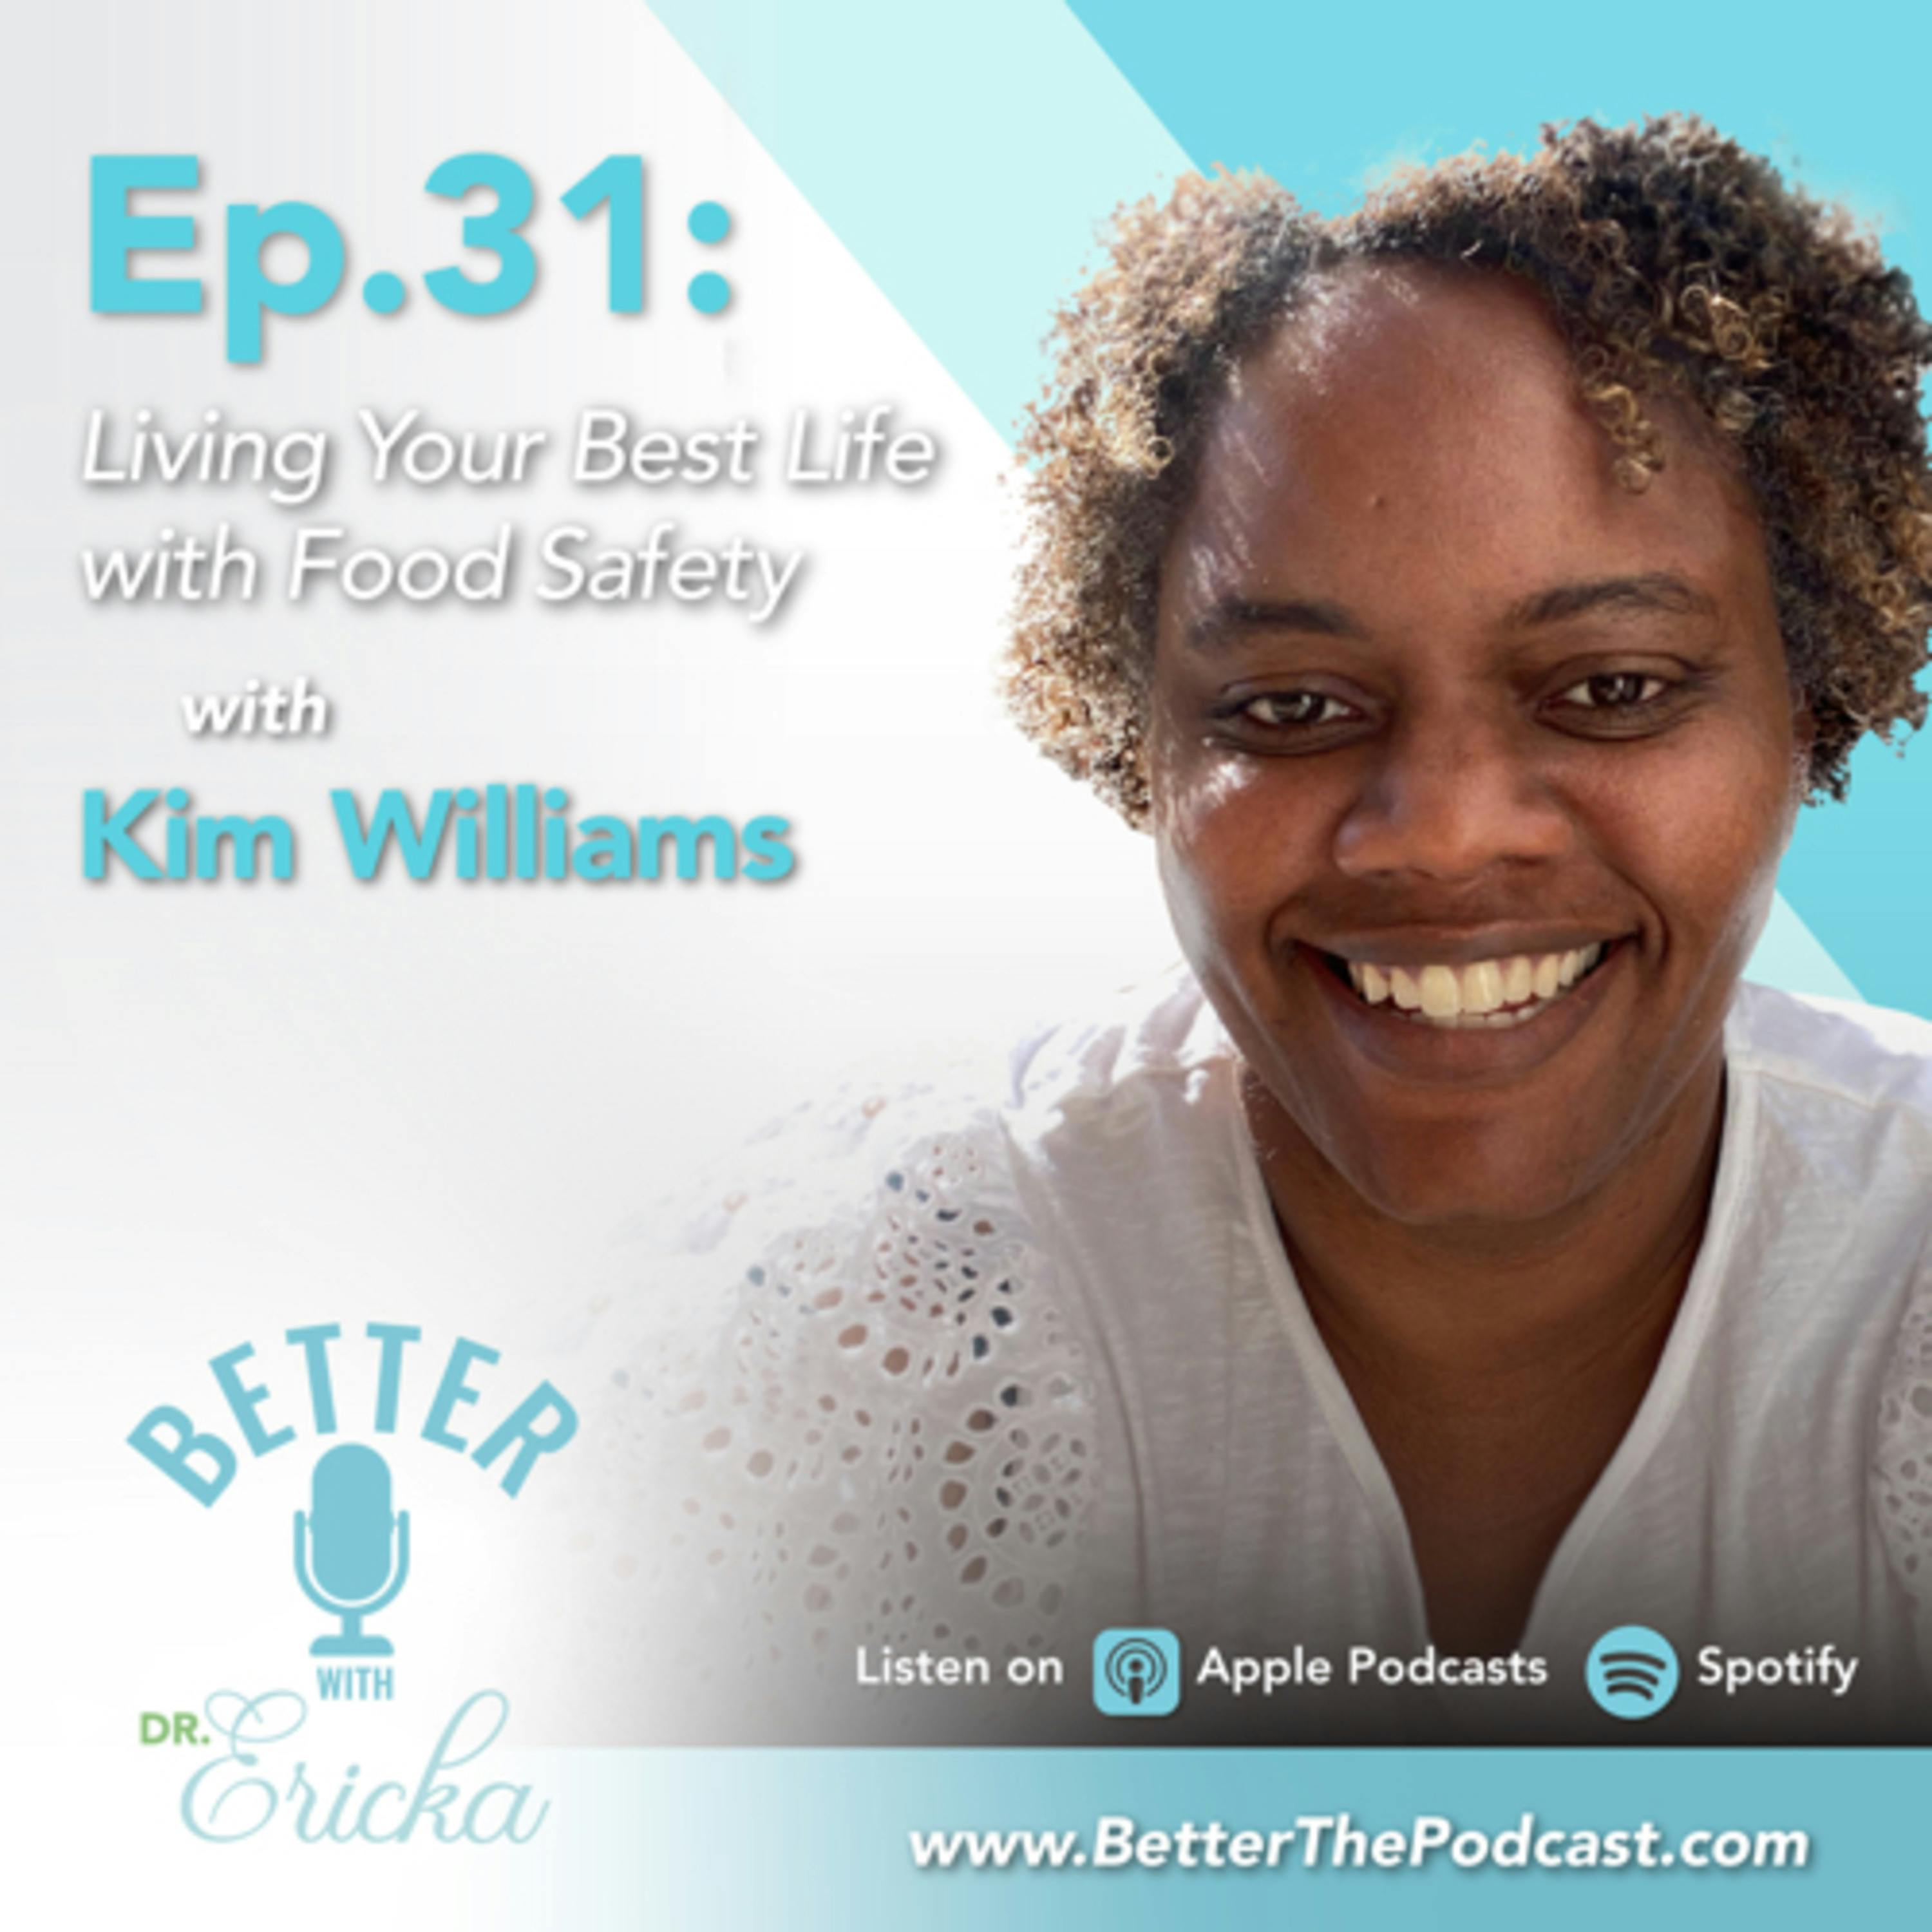 Living Your Best Life with Food Safety with Kim Williams